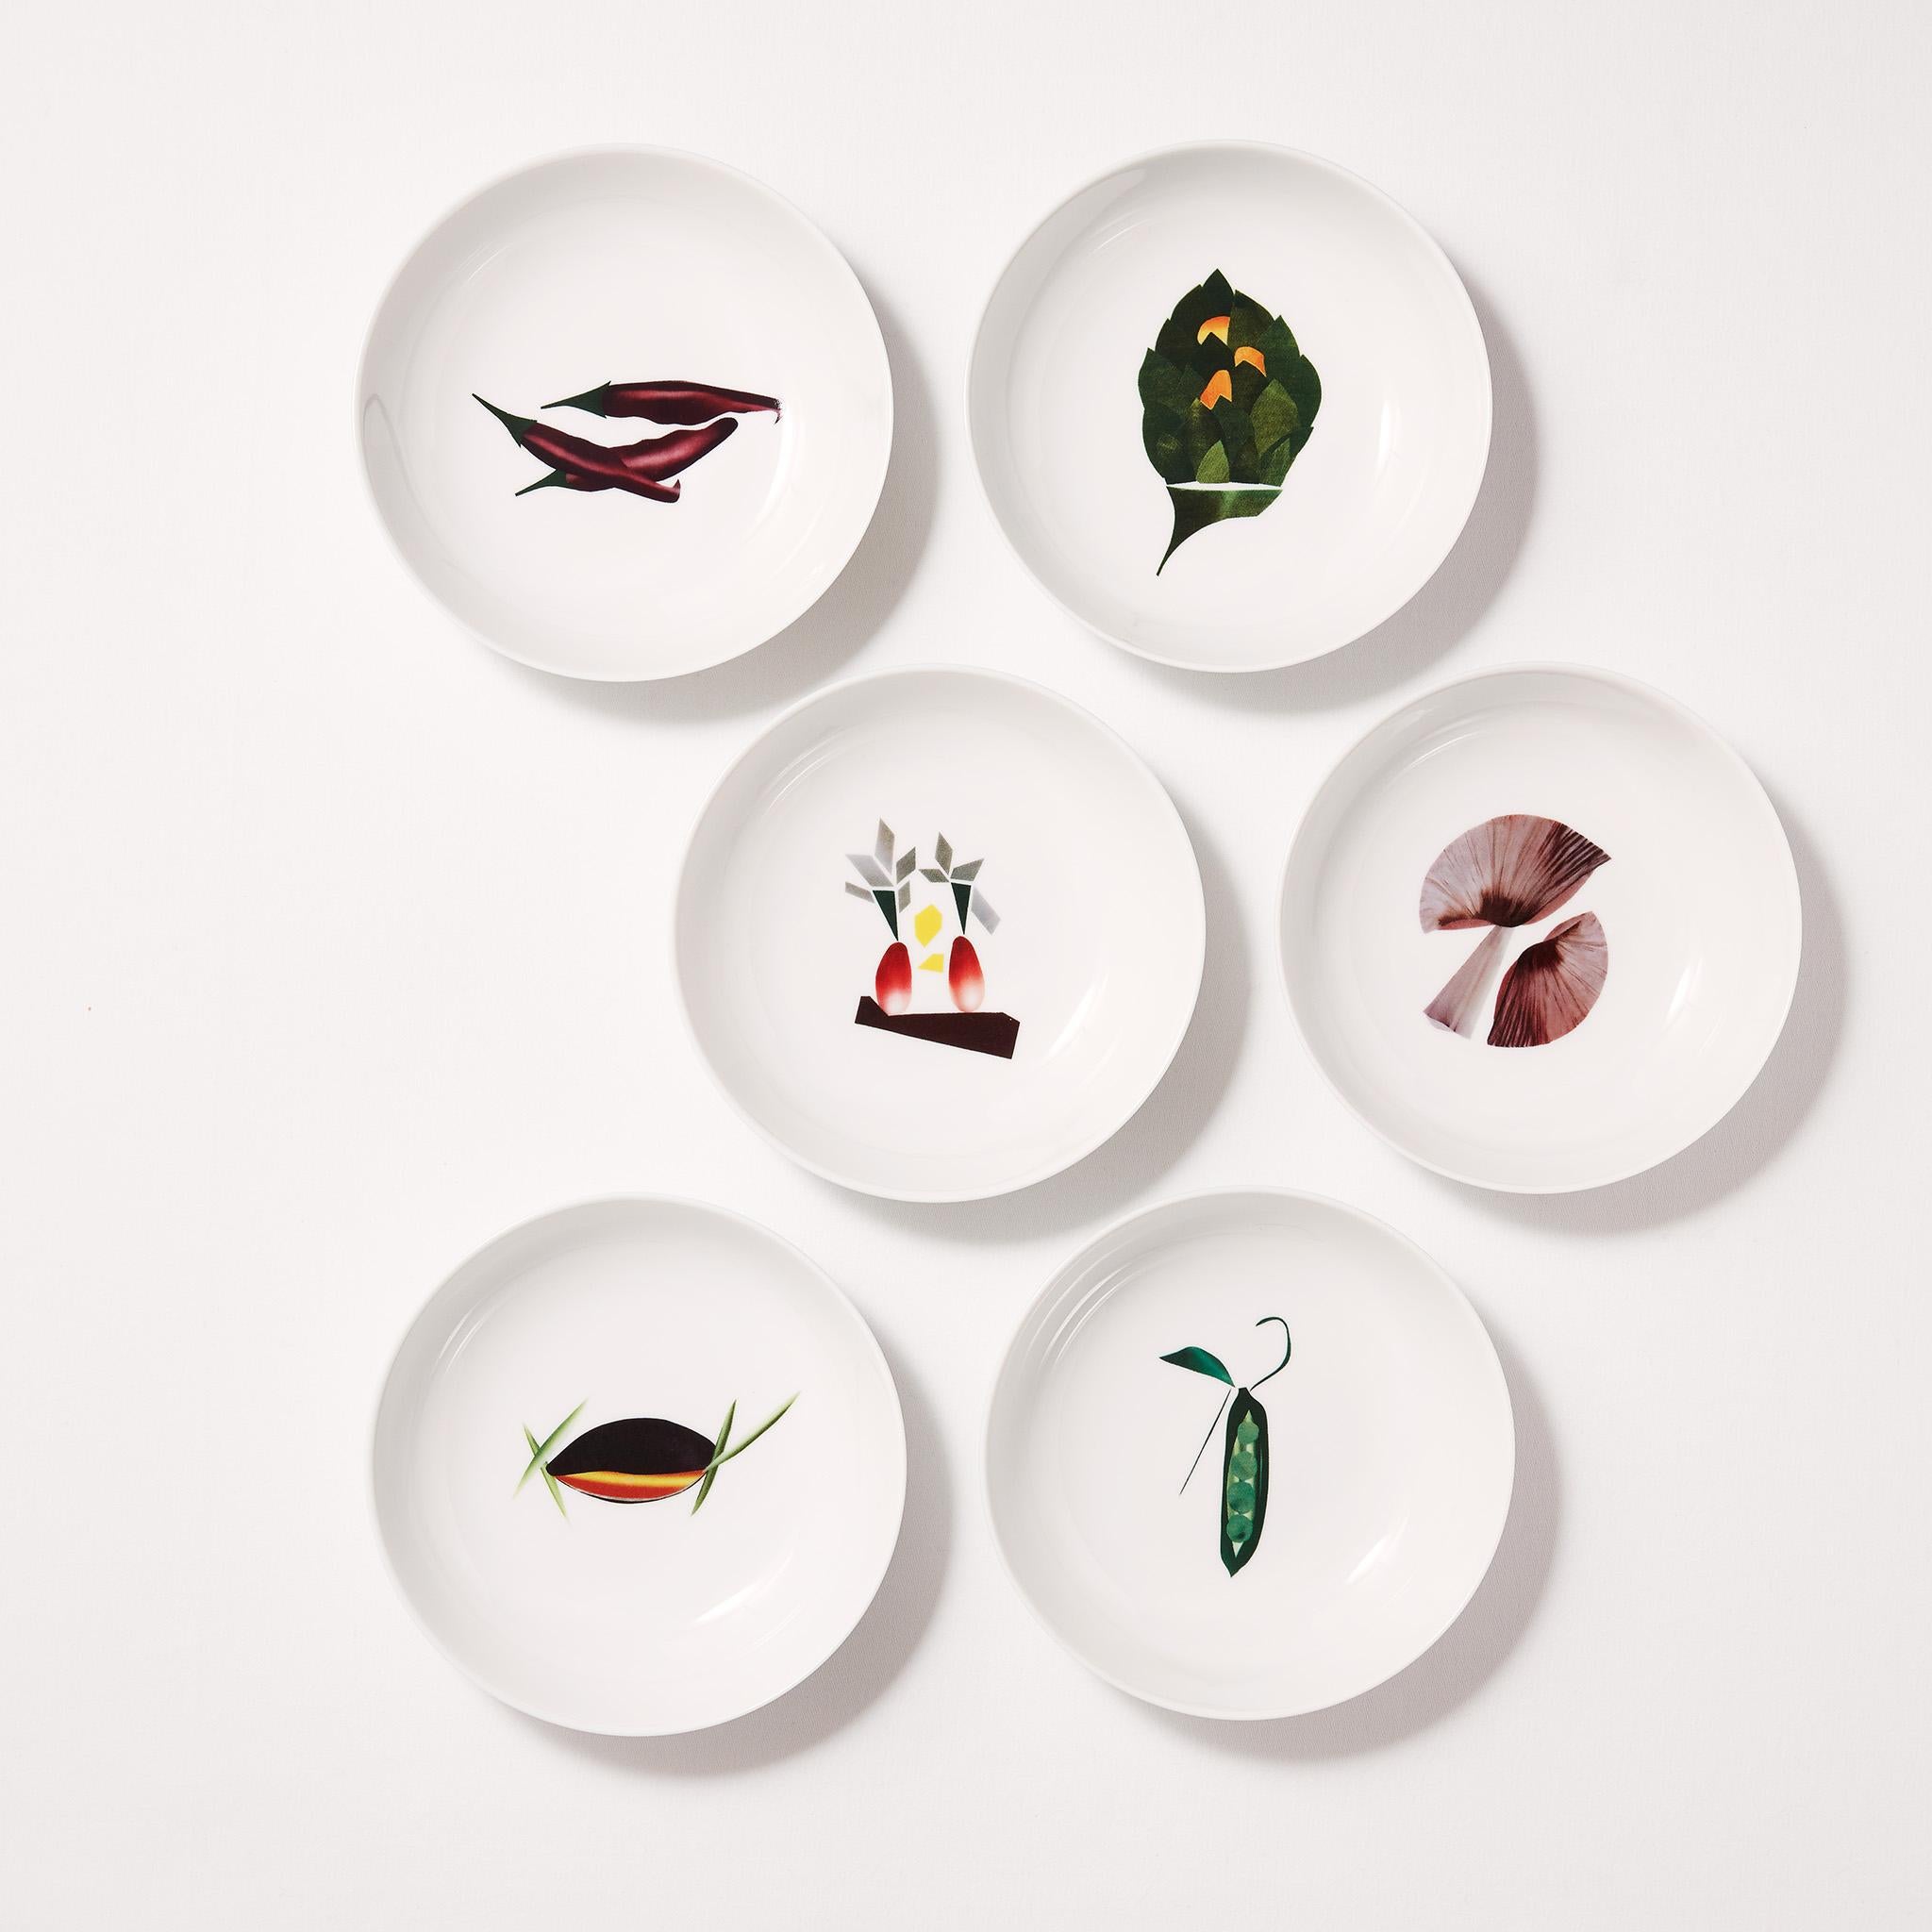 Silk-screened creation of the paper collages of the French Chef Alain Passard. A creation inspired by his recipe of natural mushroom.
From mineral porcelain to vegetable recipes, this bowl is an Ode to Dame Nature.

Bowl that adapts to all forms of